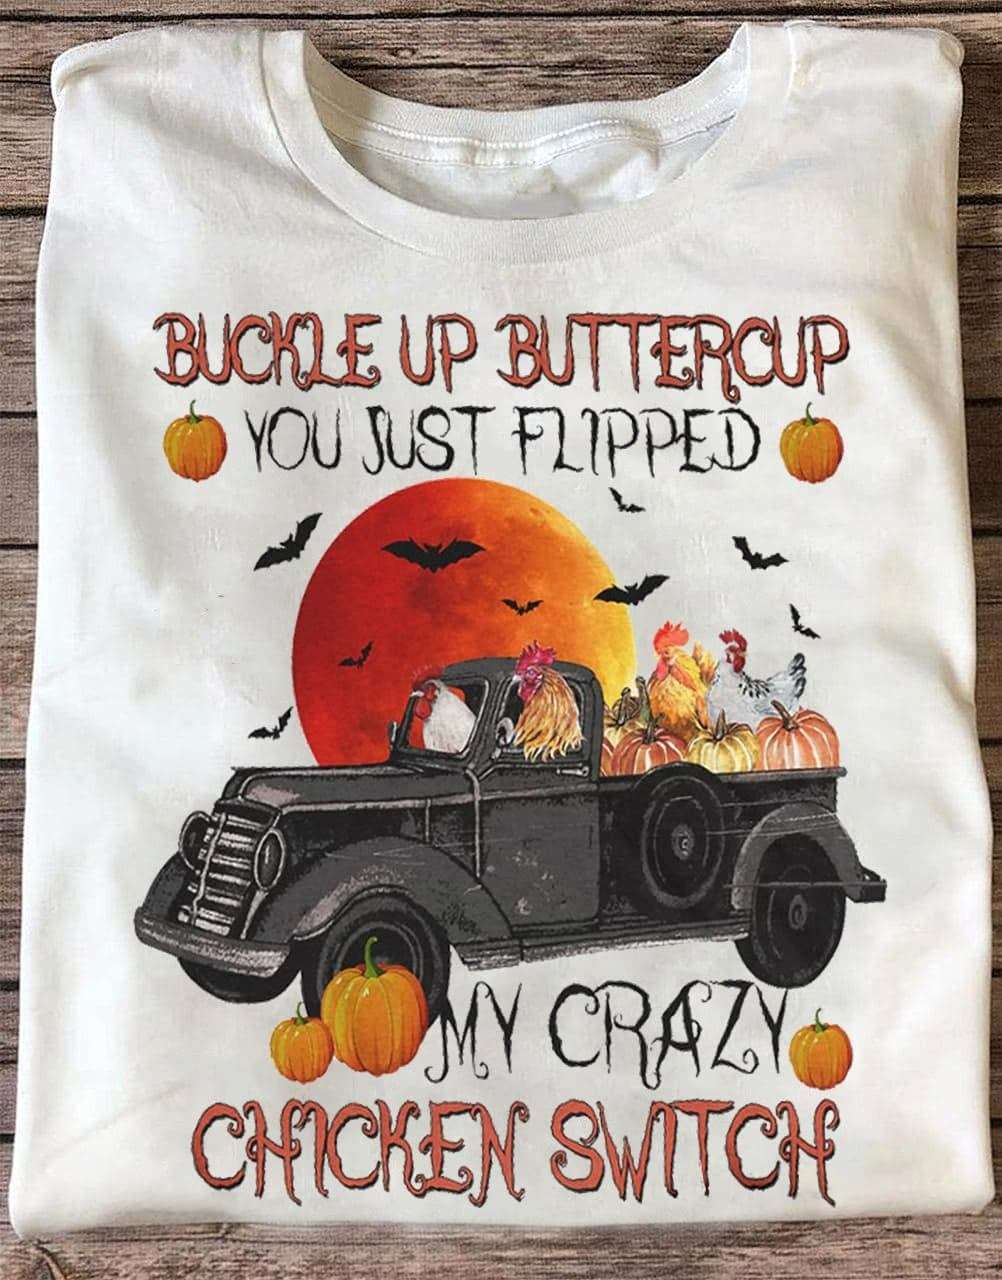 Tractor Chicken - Buckle up buttercup you just flipped my crazy chicken switch